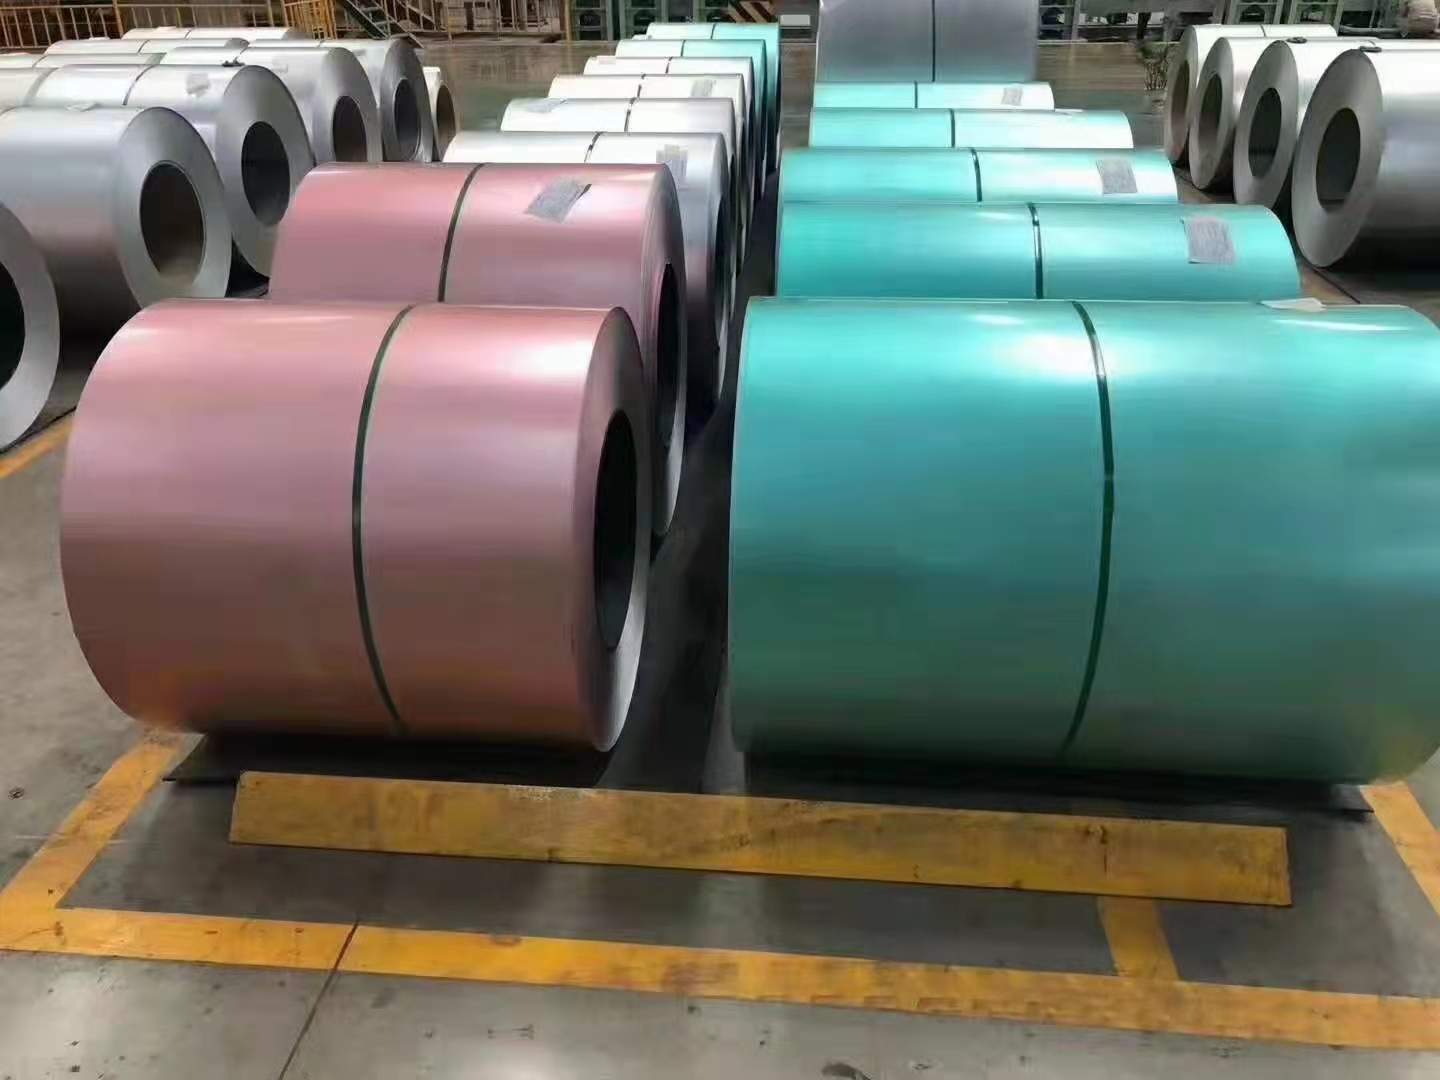 Prime RAL Color New Prepainted Galvanized Steel Coil PPGI / PPGL / HDGL / HDGI Cold Rolled Steel Sheet Top Quality Hot Sale